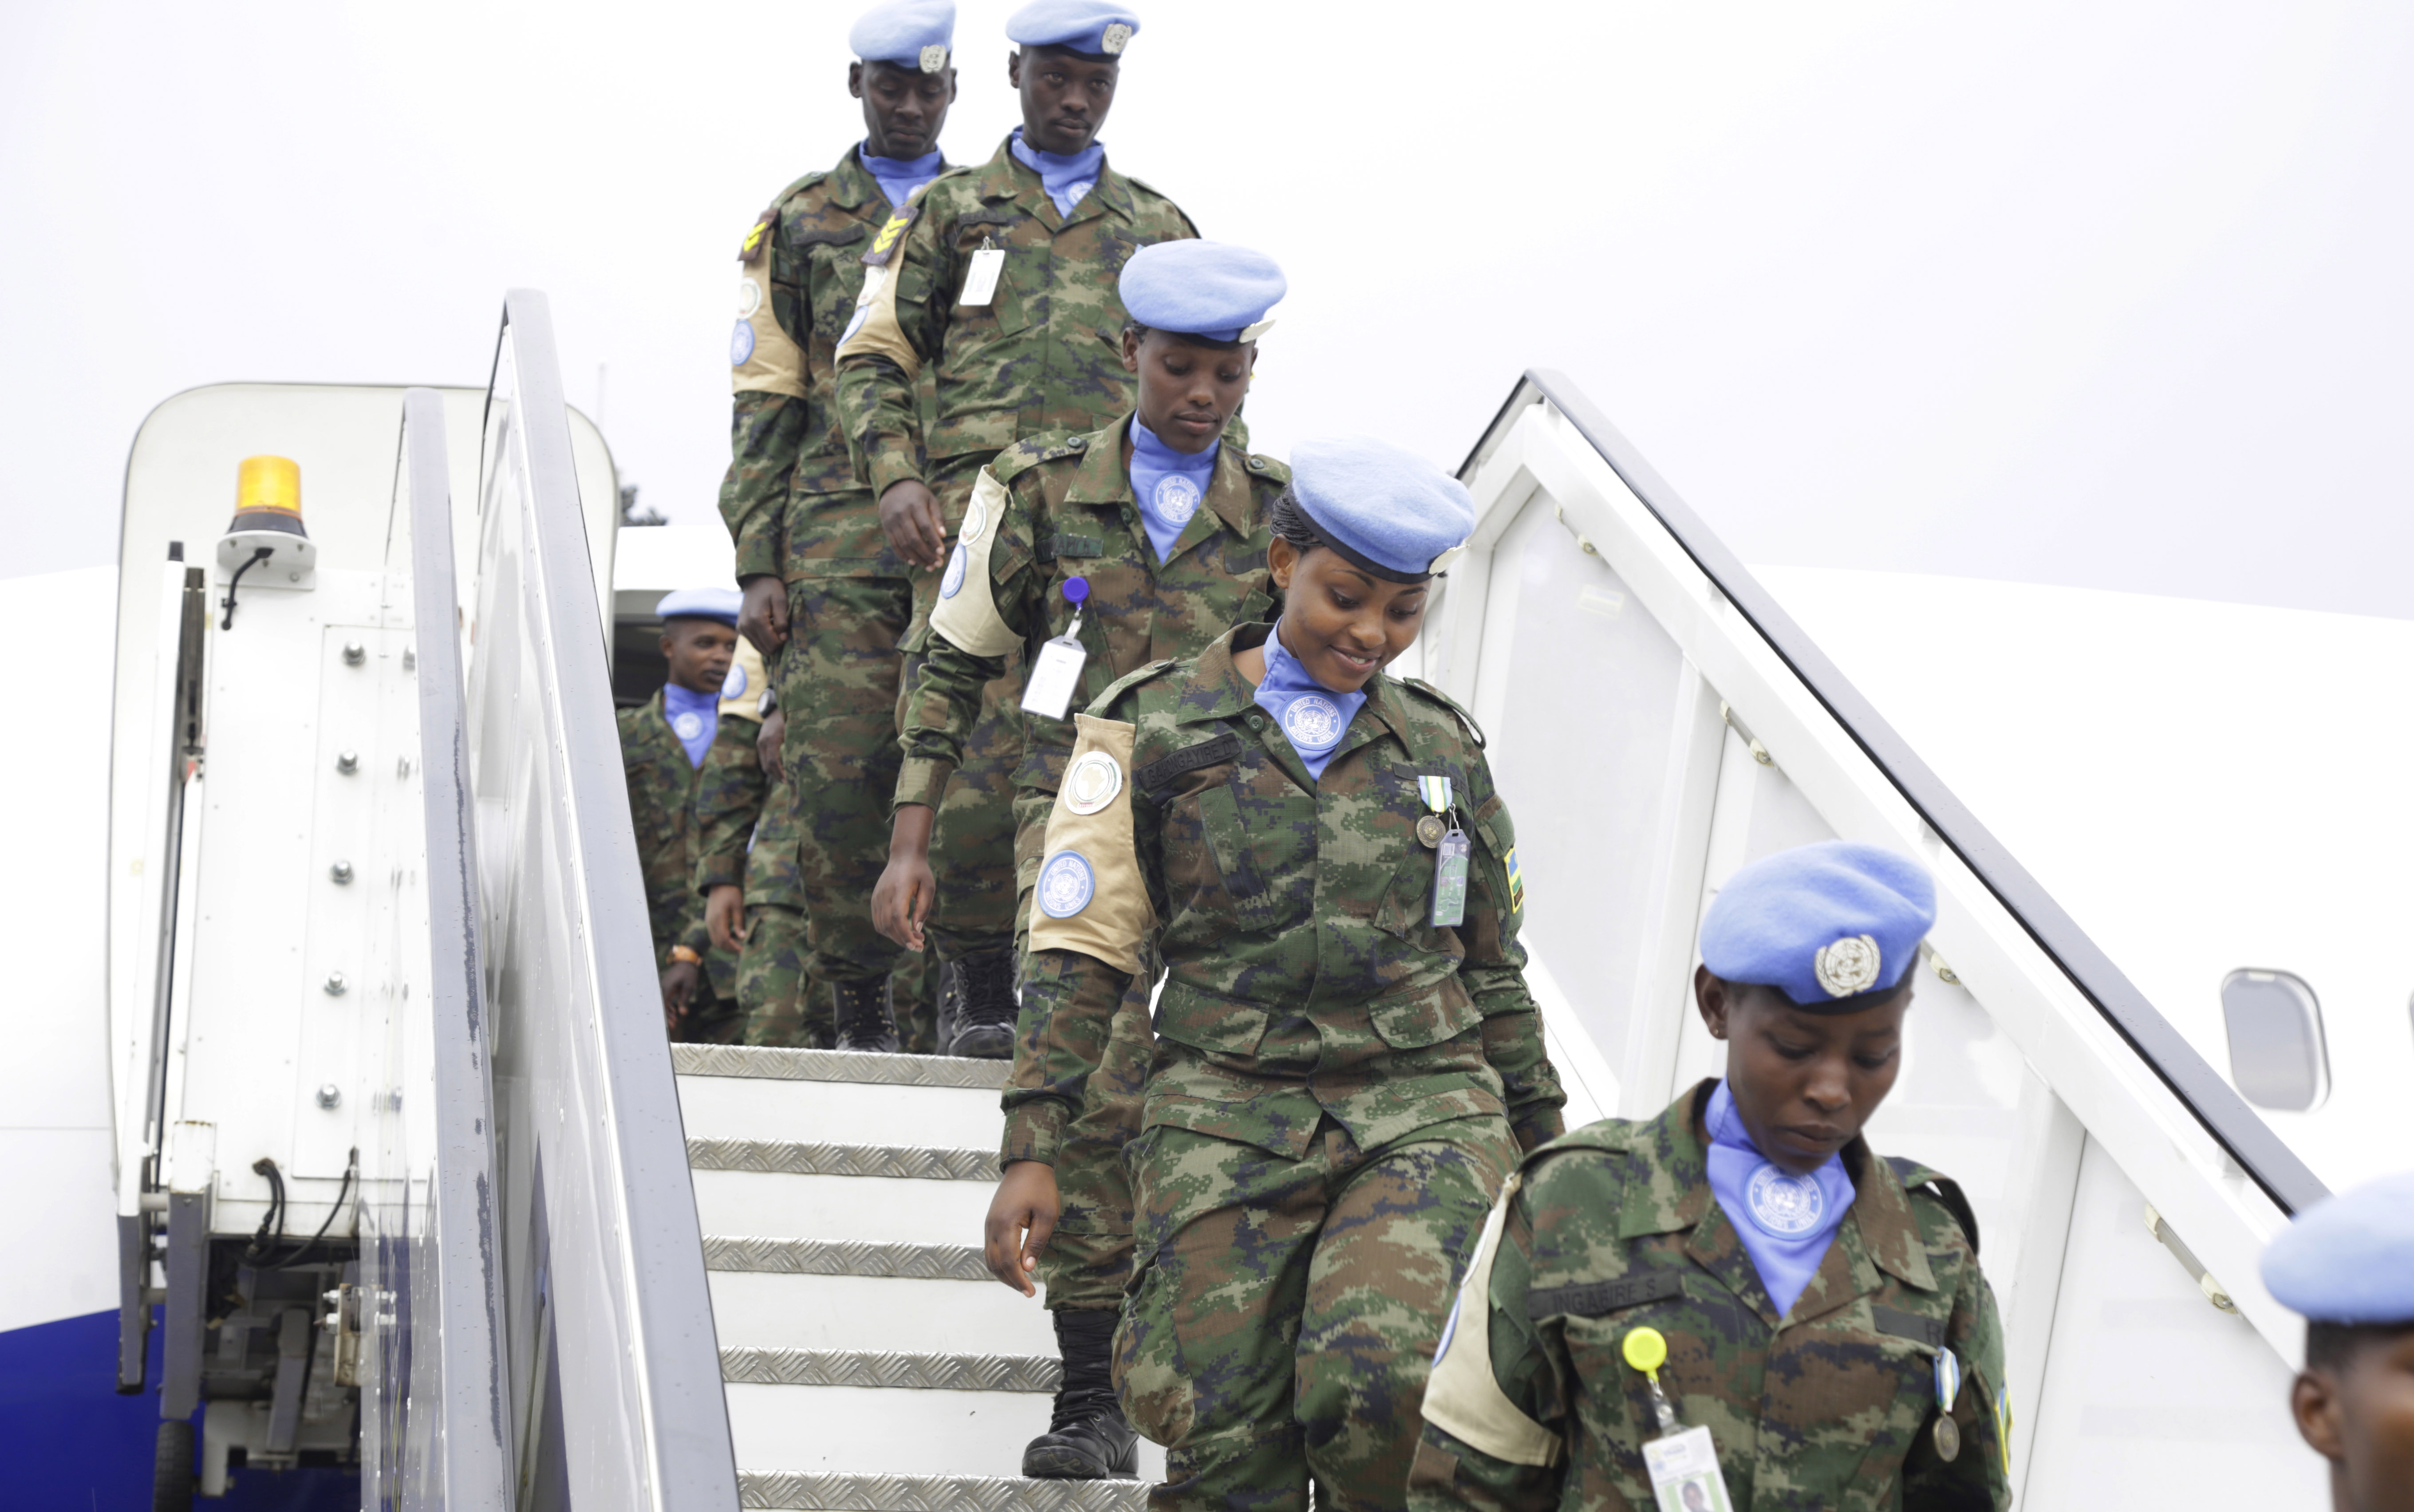 Some women soldiers of Rwanda Defense Force arrive at Kigali International Airport from peacekeeping mission in Darfur in 2019. 